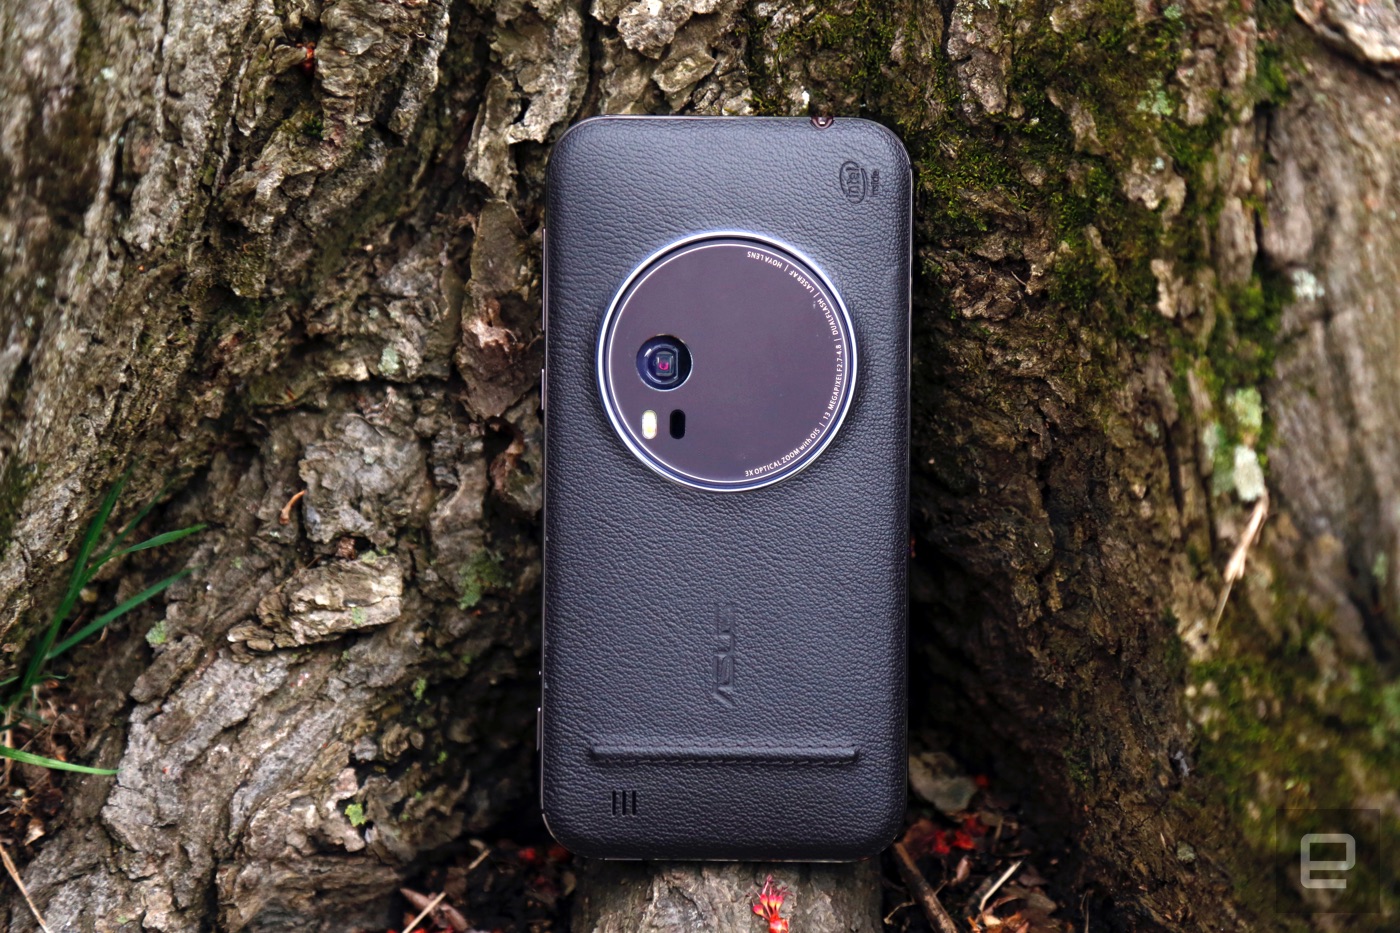 ASUS' ZenFone Zoom is ultimately held back by a mediocre sensor